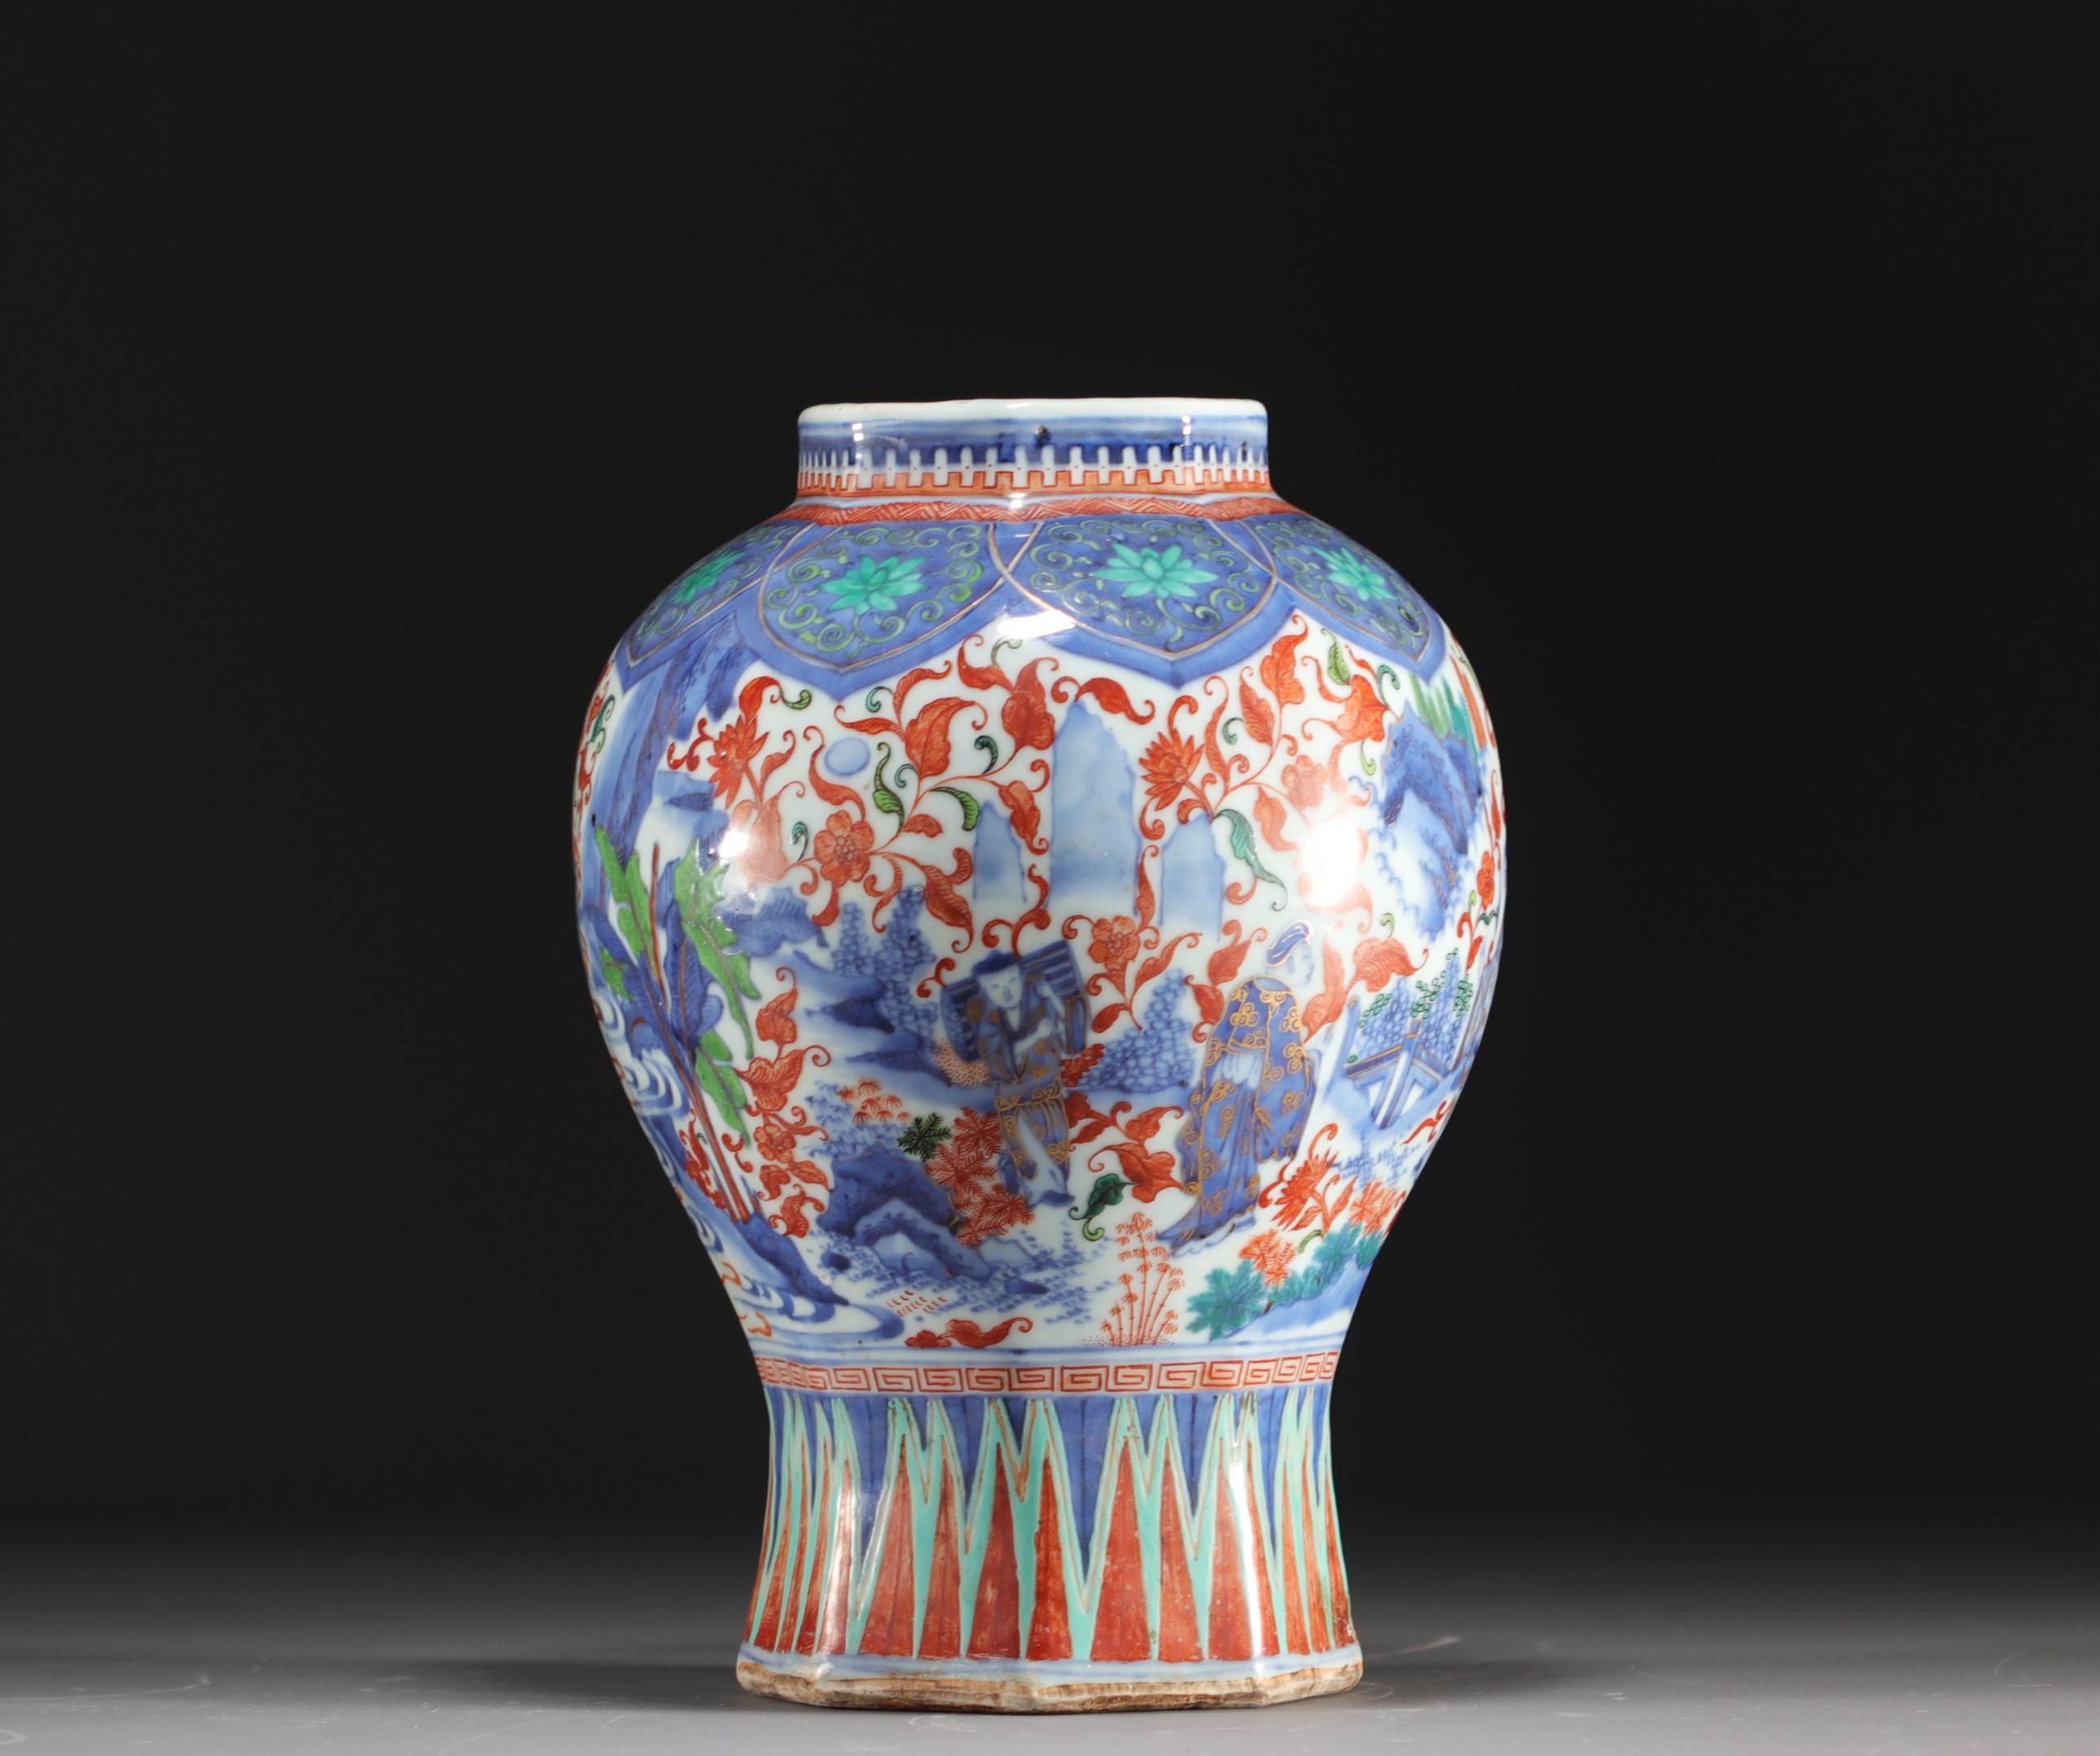 China - Polychrome porcelain vase decorated with figures and landscape, transition period. - Image 6 of 7